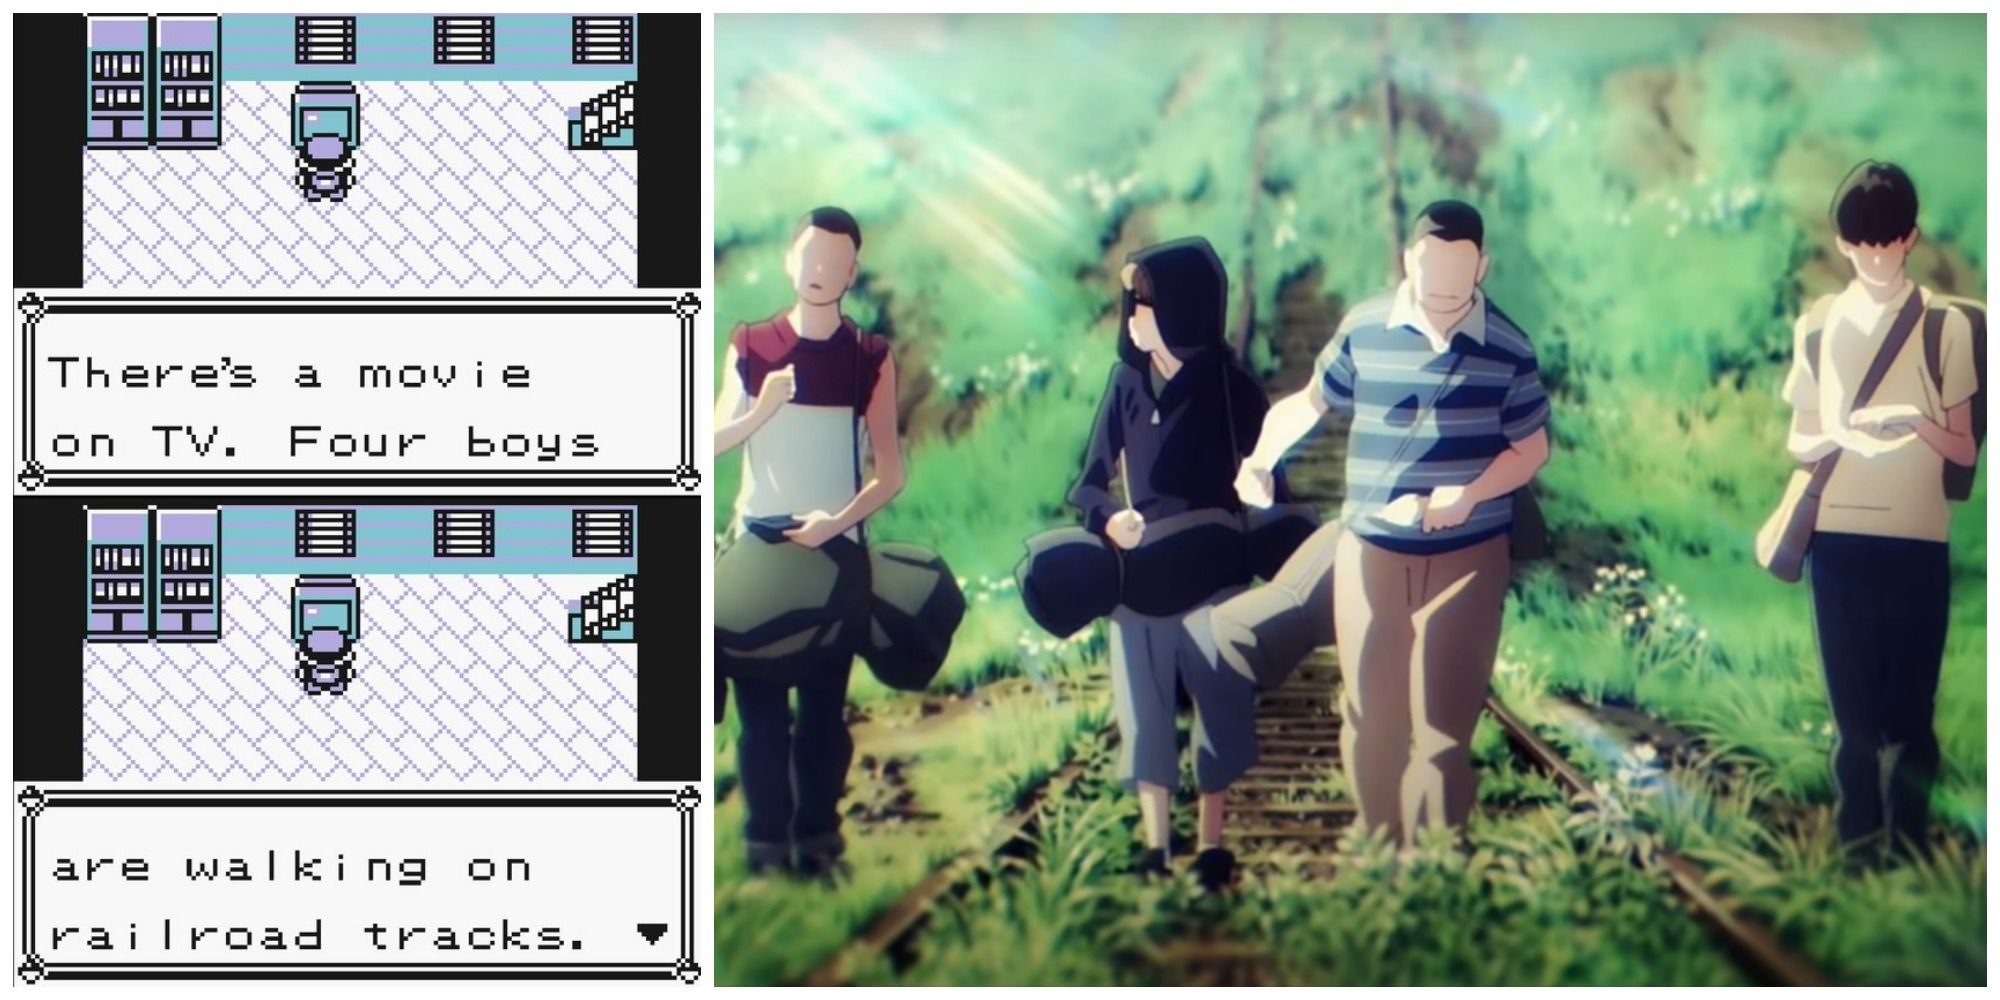 Pokémon Stand by Me reference in Gen I plus Bump of Chicken video